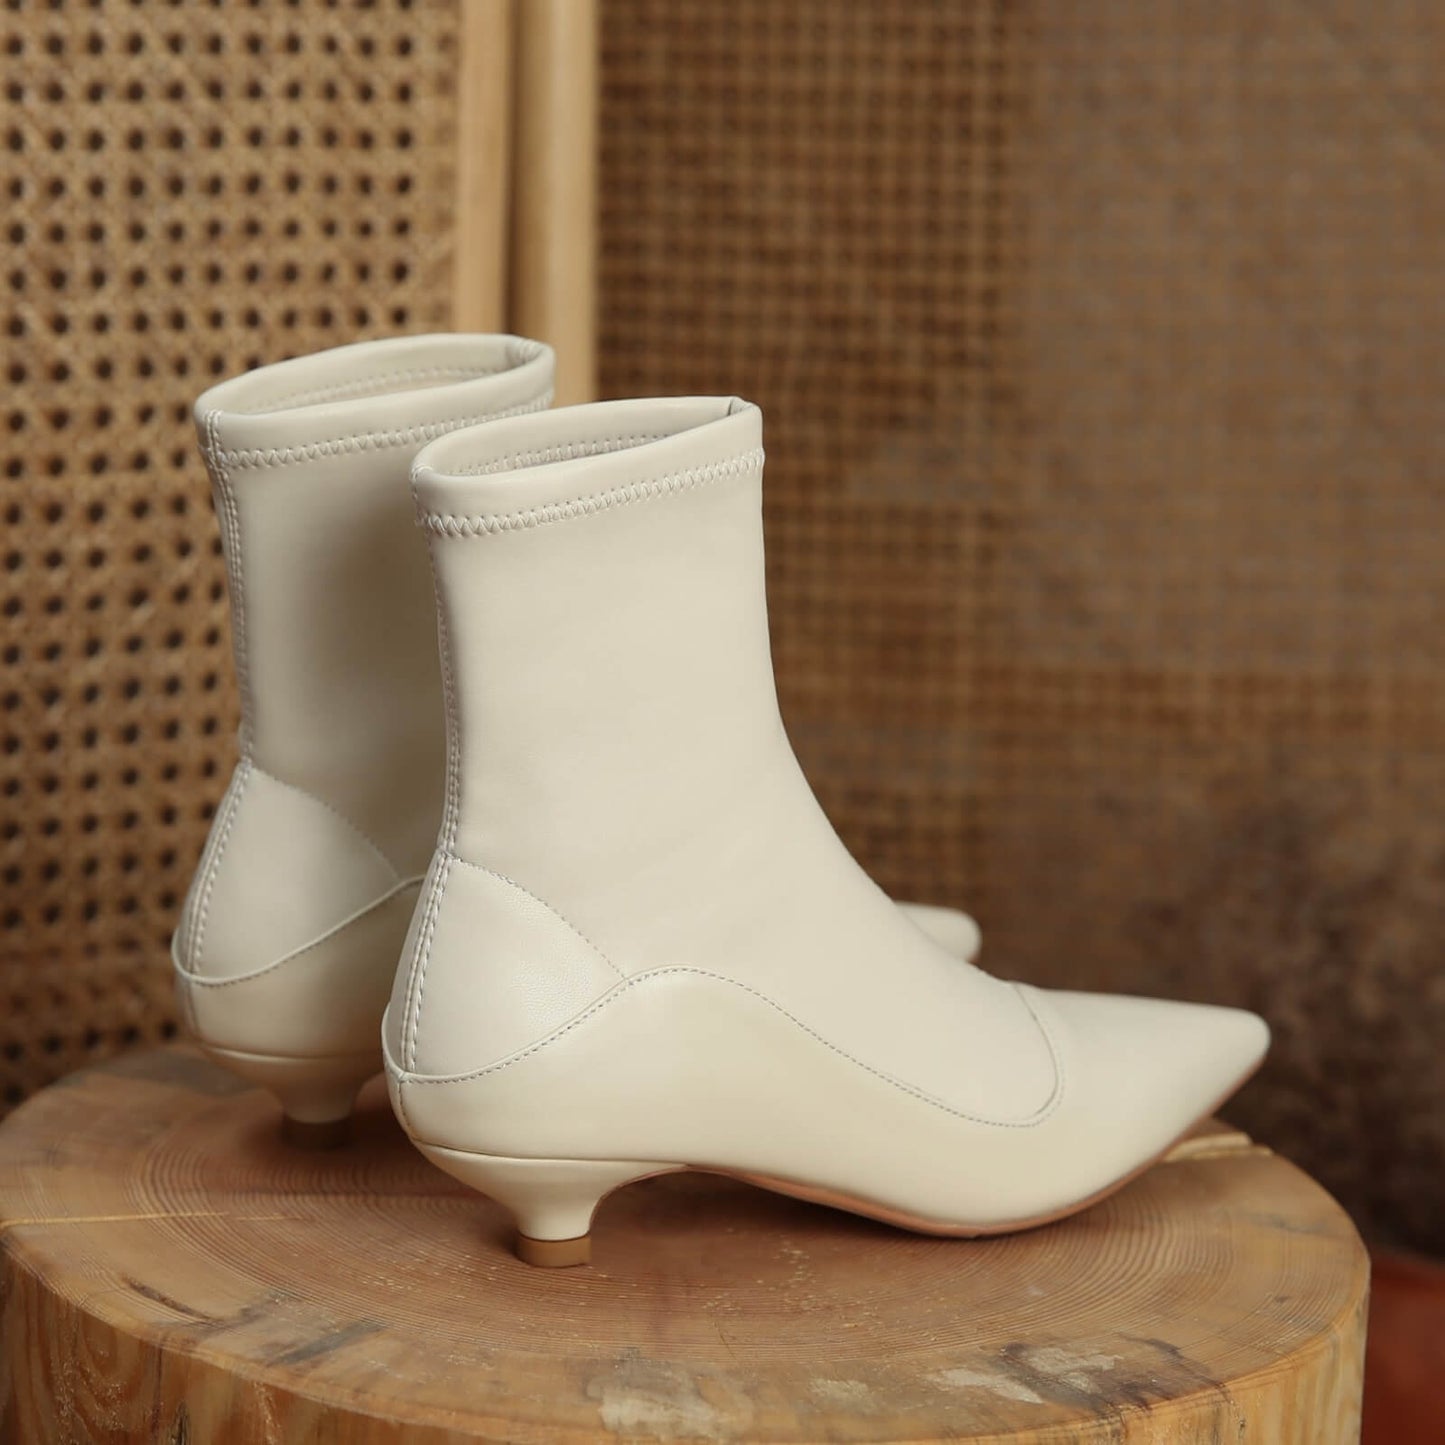 Kaly-Kitten-Heels-Pointed-Toe-Stitching-Vamp-White-Ankle-Boots-Leather-1